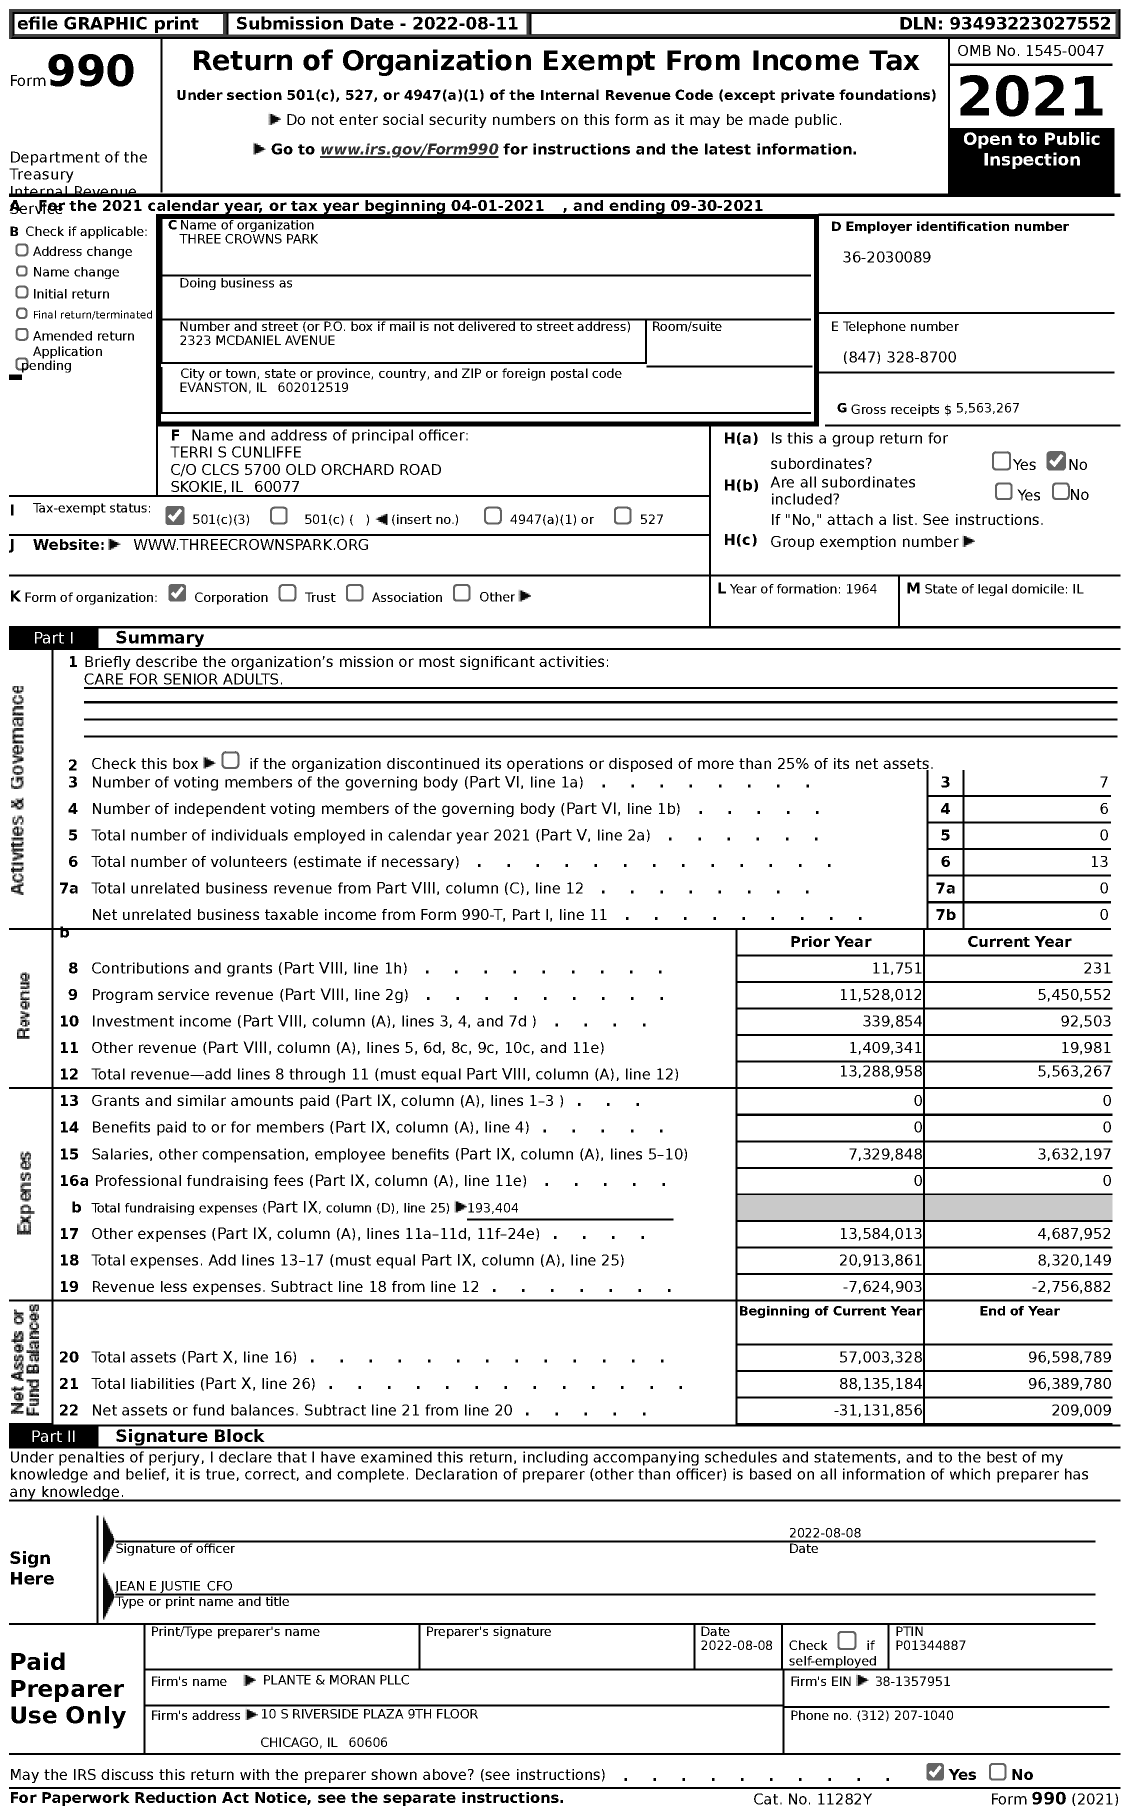 Image of first page of 2020 Form 990 for Three Crowns Park